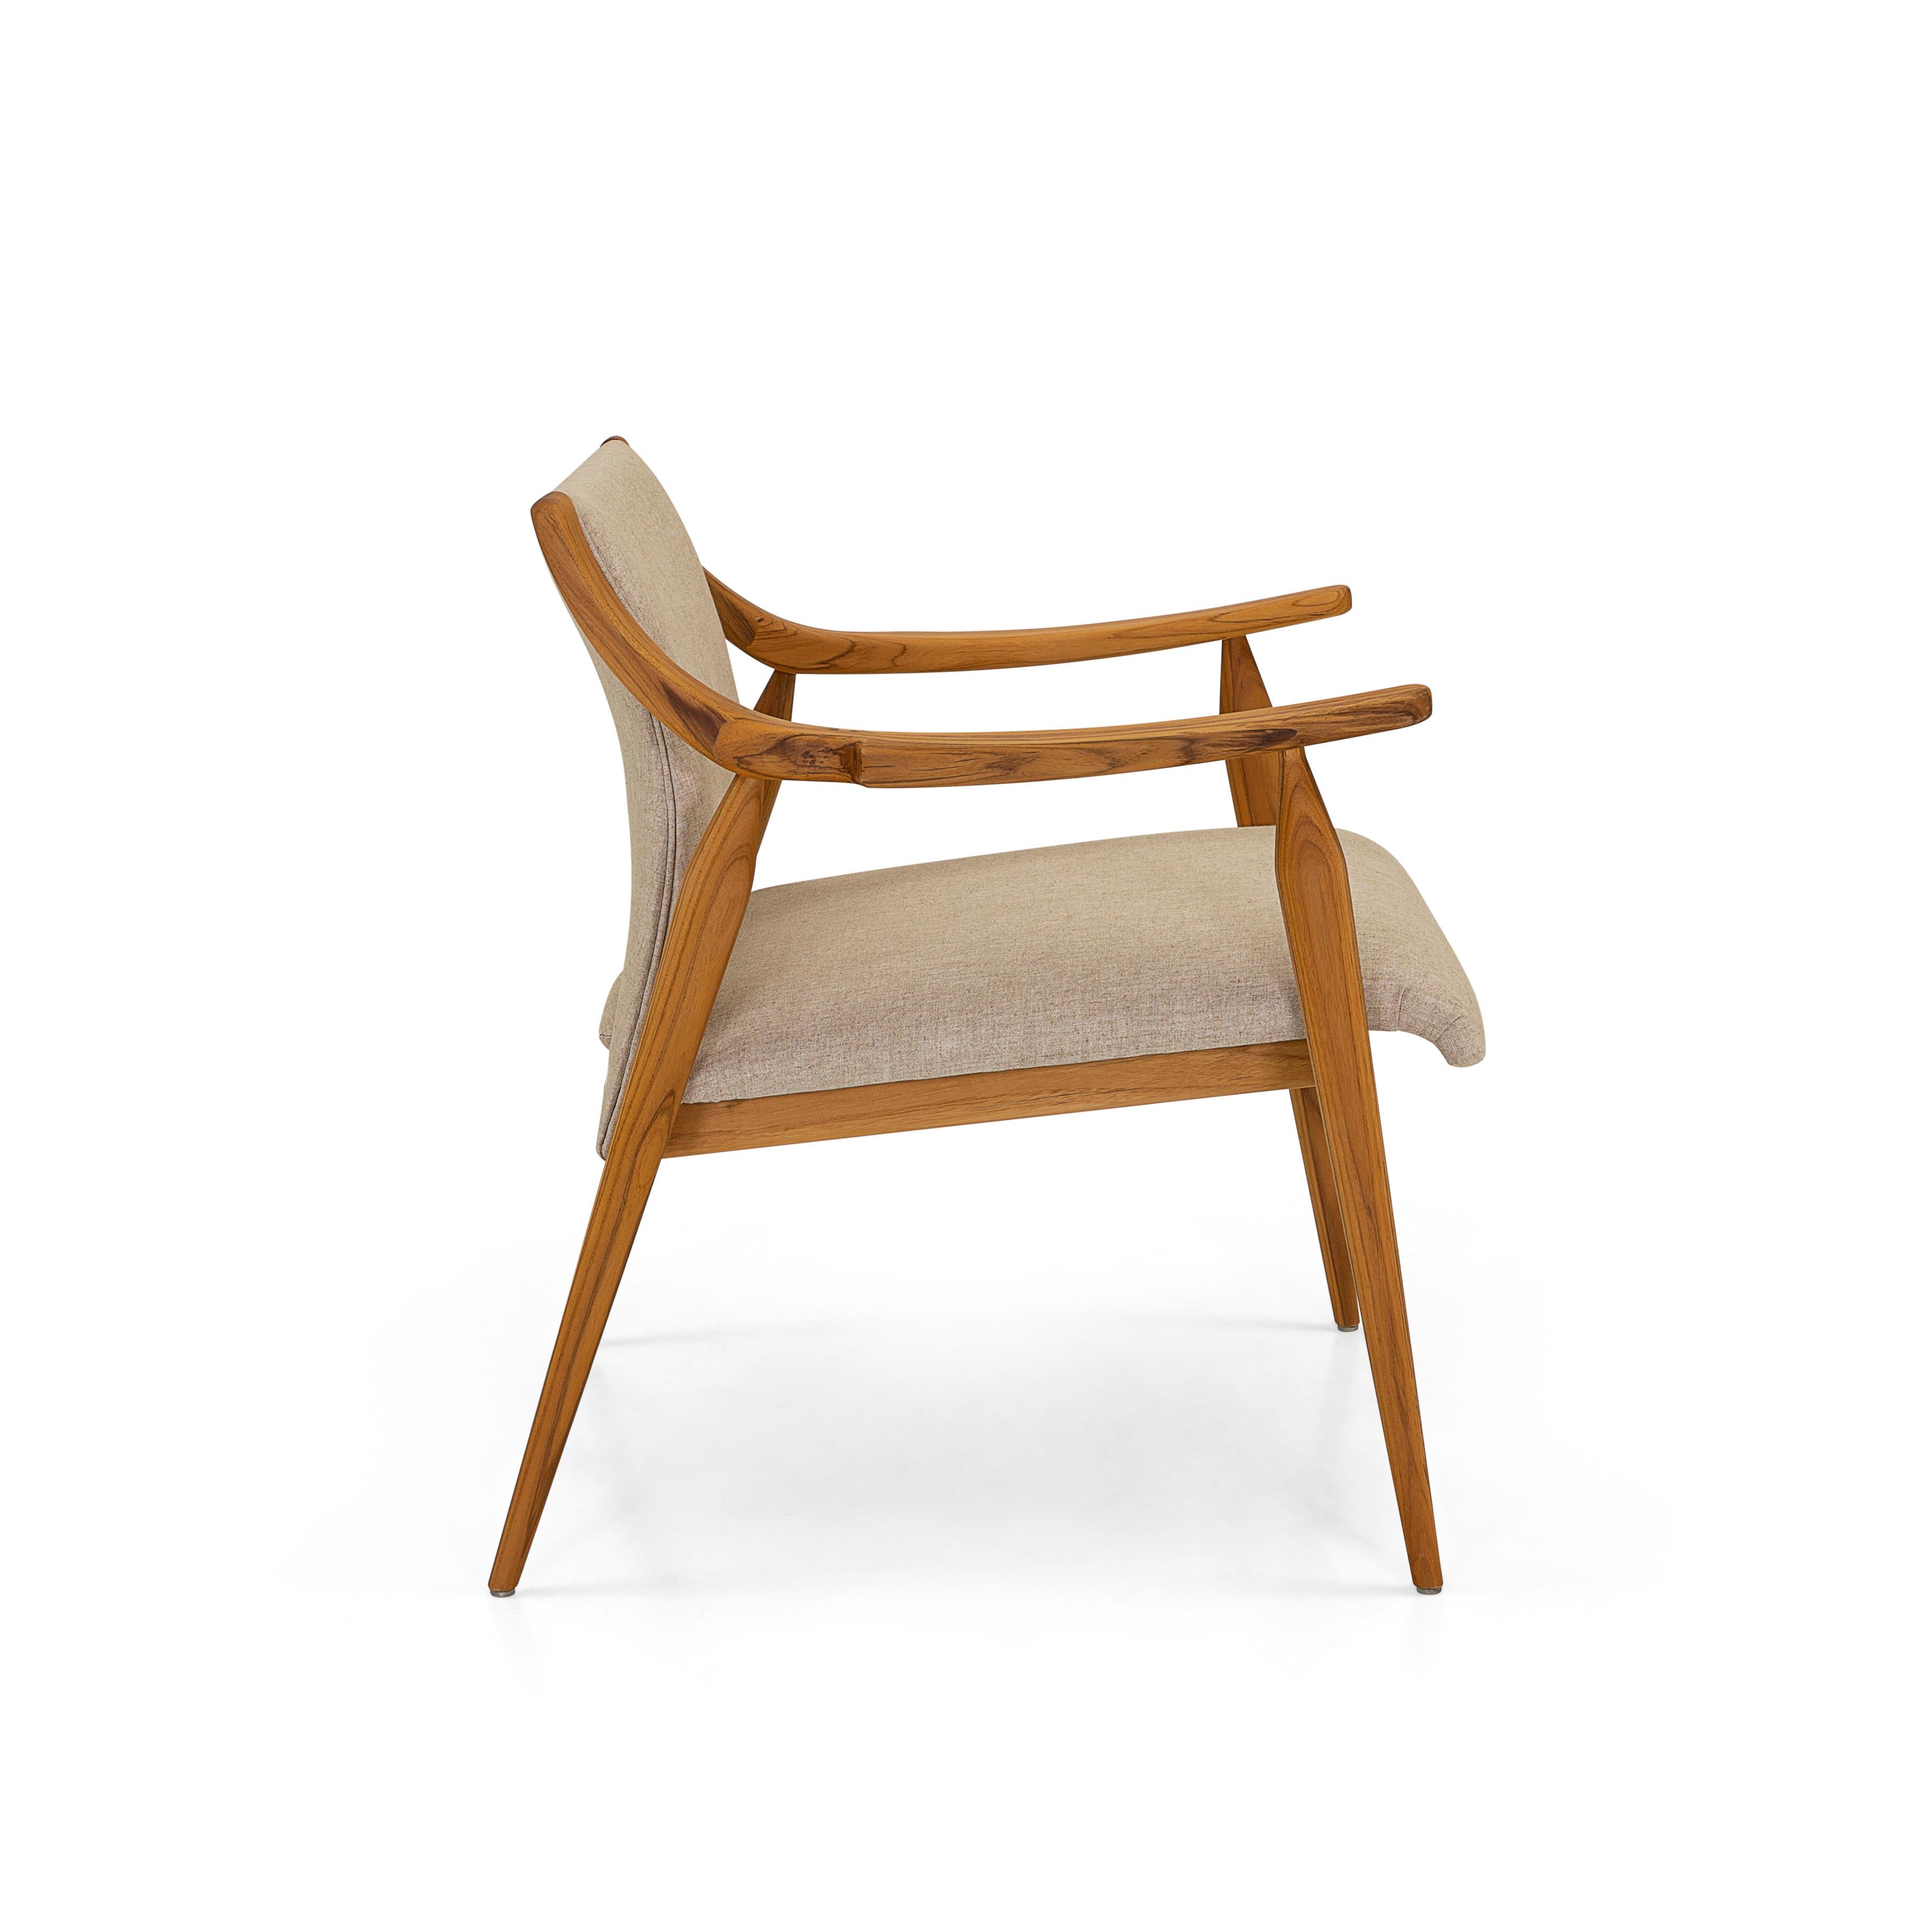 The Mince armchair is a welcoming addition to any room in your modern home decor with its teak finish curved arms and spindle legs and brown beautiful and soft fabric for the cushions. This modern chair has a clean Minimalist simple design without